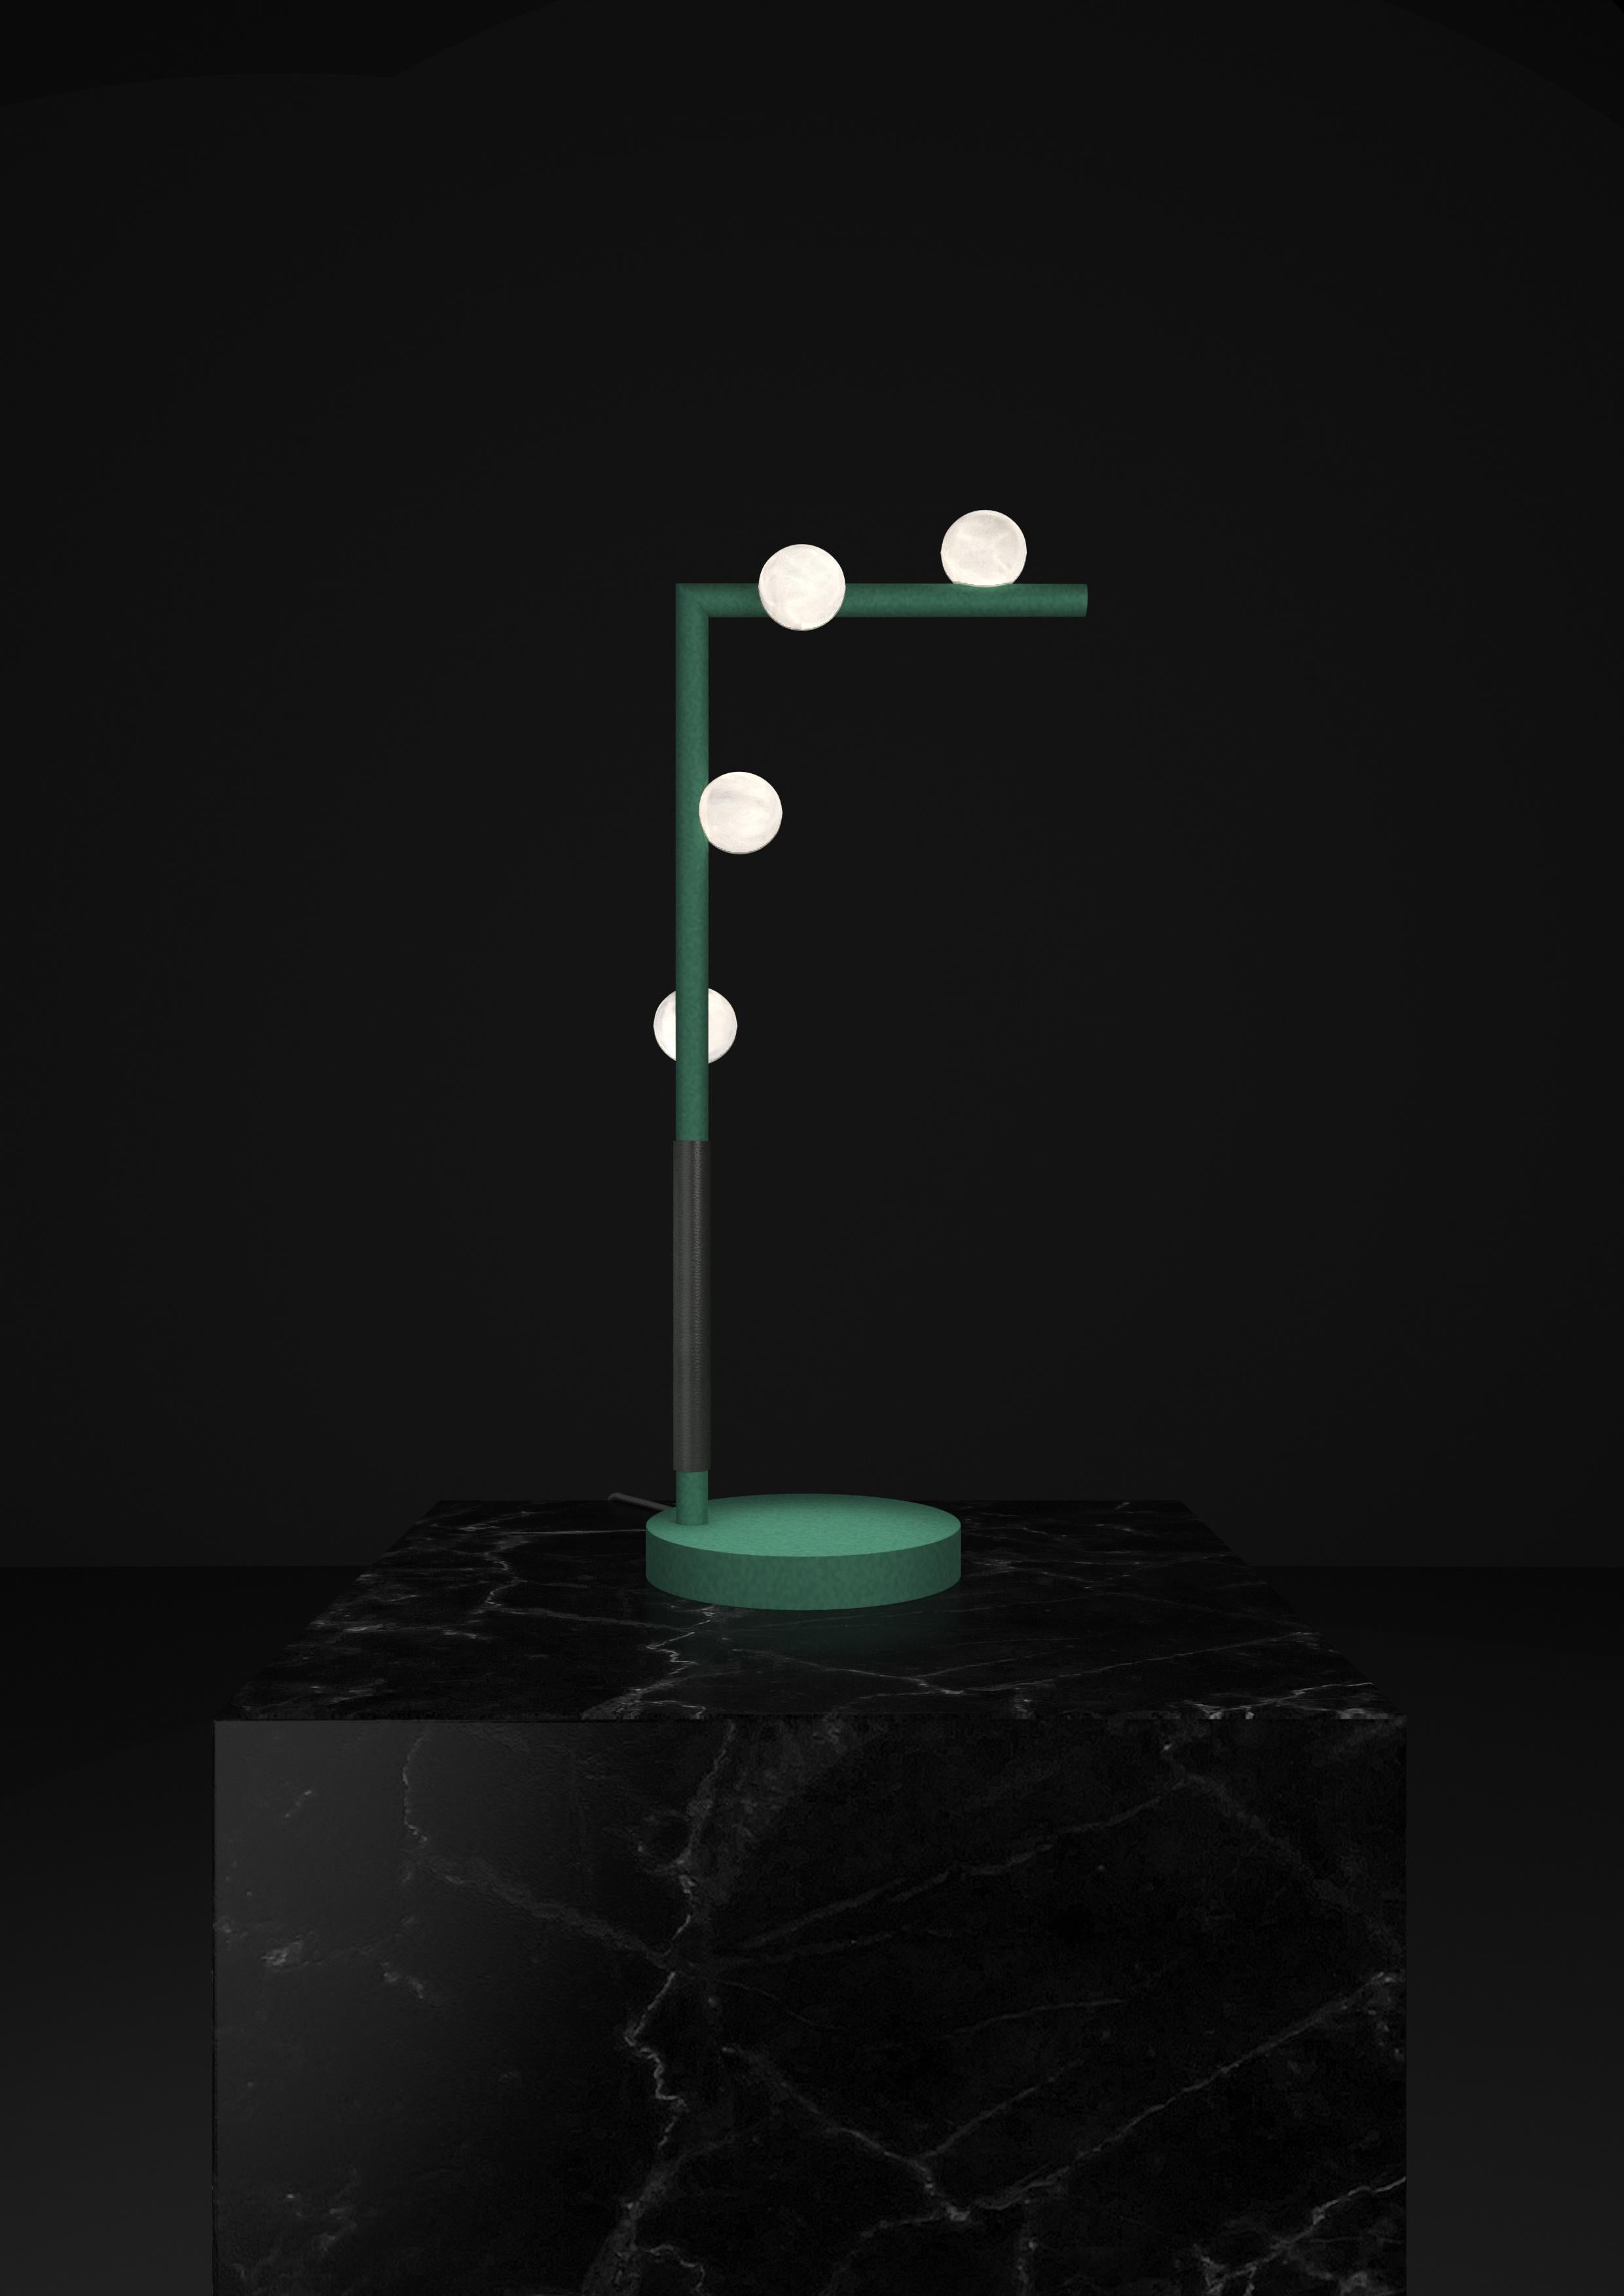 Demetra Freedom Green Metal Table Lamp by Alabastro Italiano
Dimensions: D 20 x W 35 x H 67 cm.
Materials: White alabaster, metal and leather.

Available in different finishes: Shiny Silver, Bronze, Brushed Brass, Ruggine of Florence, Brushed